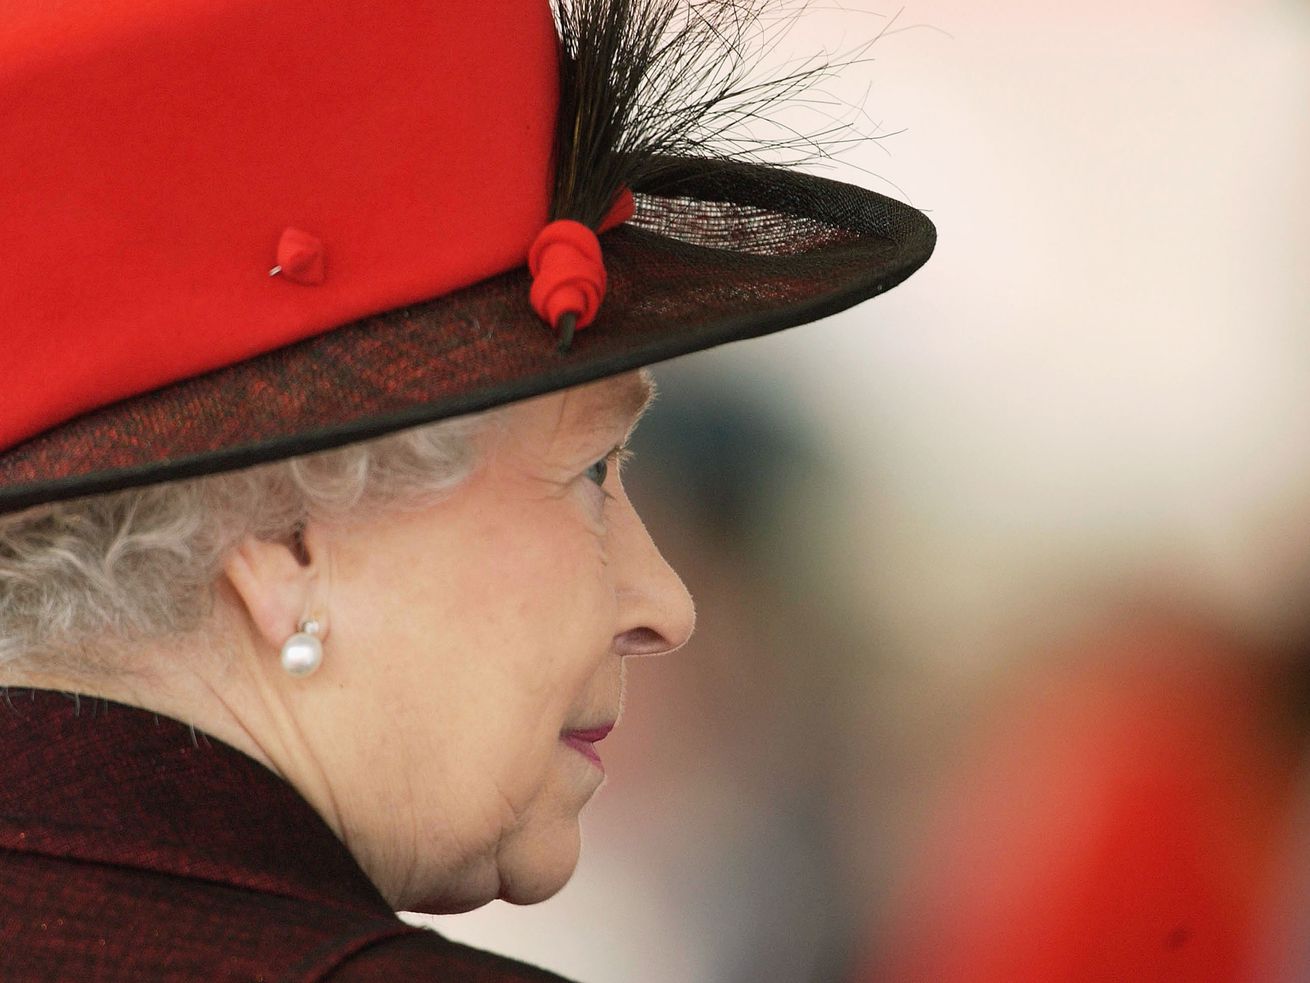 Queen Elizabeth II and the long 20th century